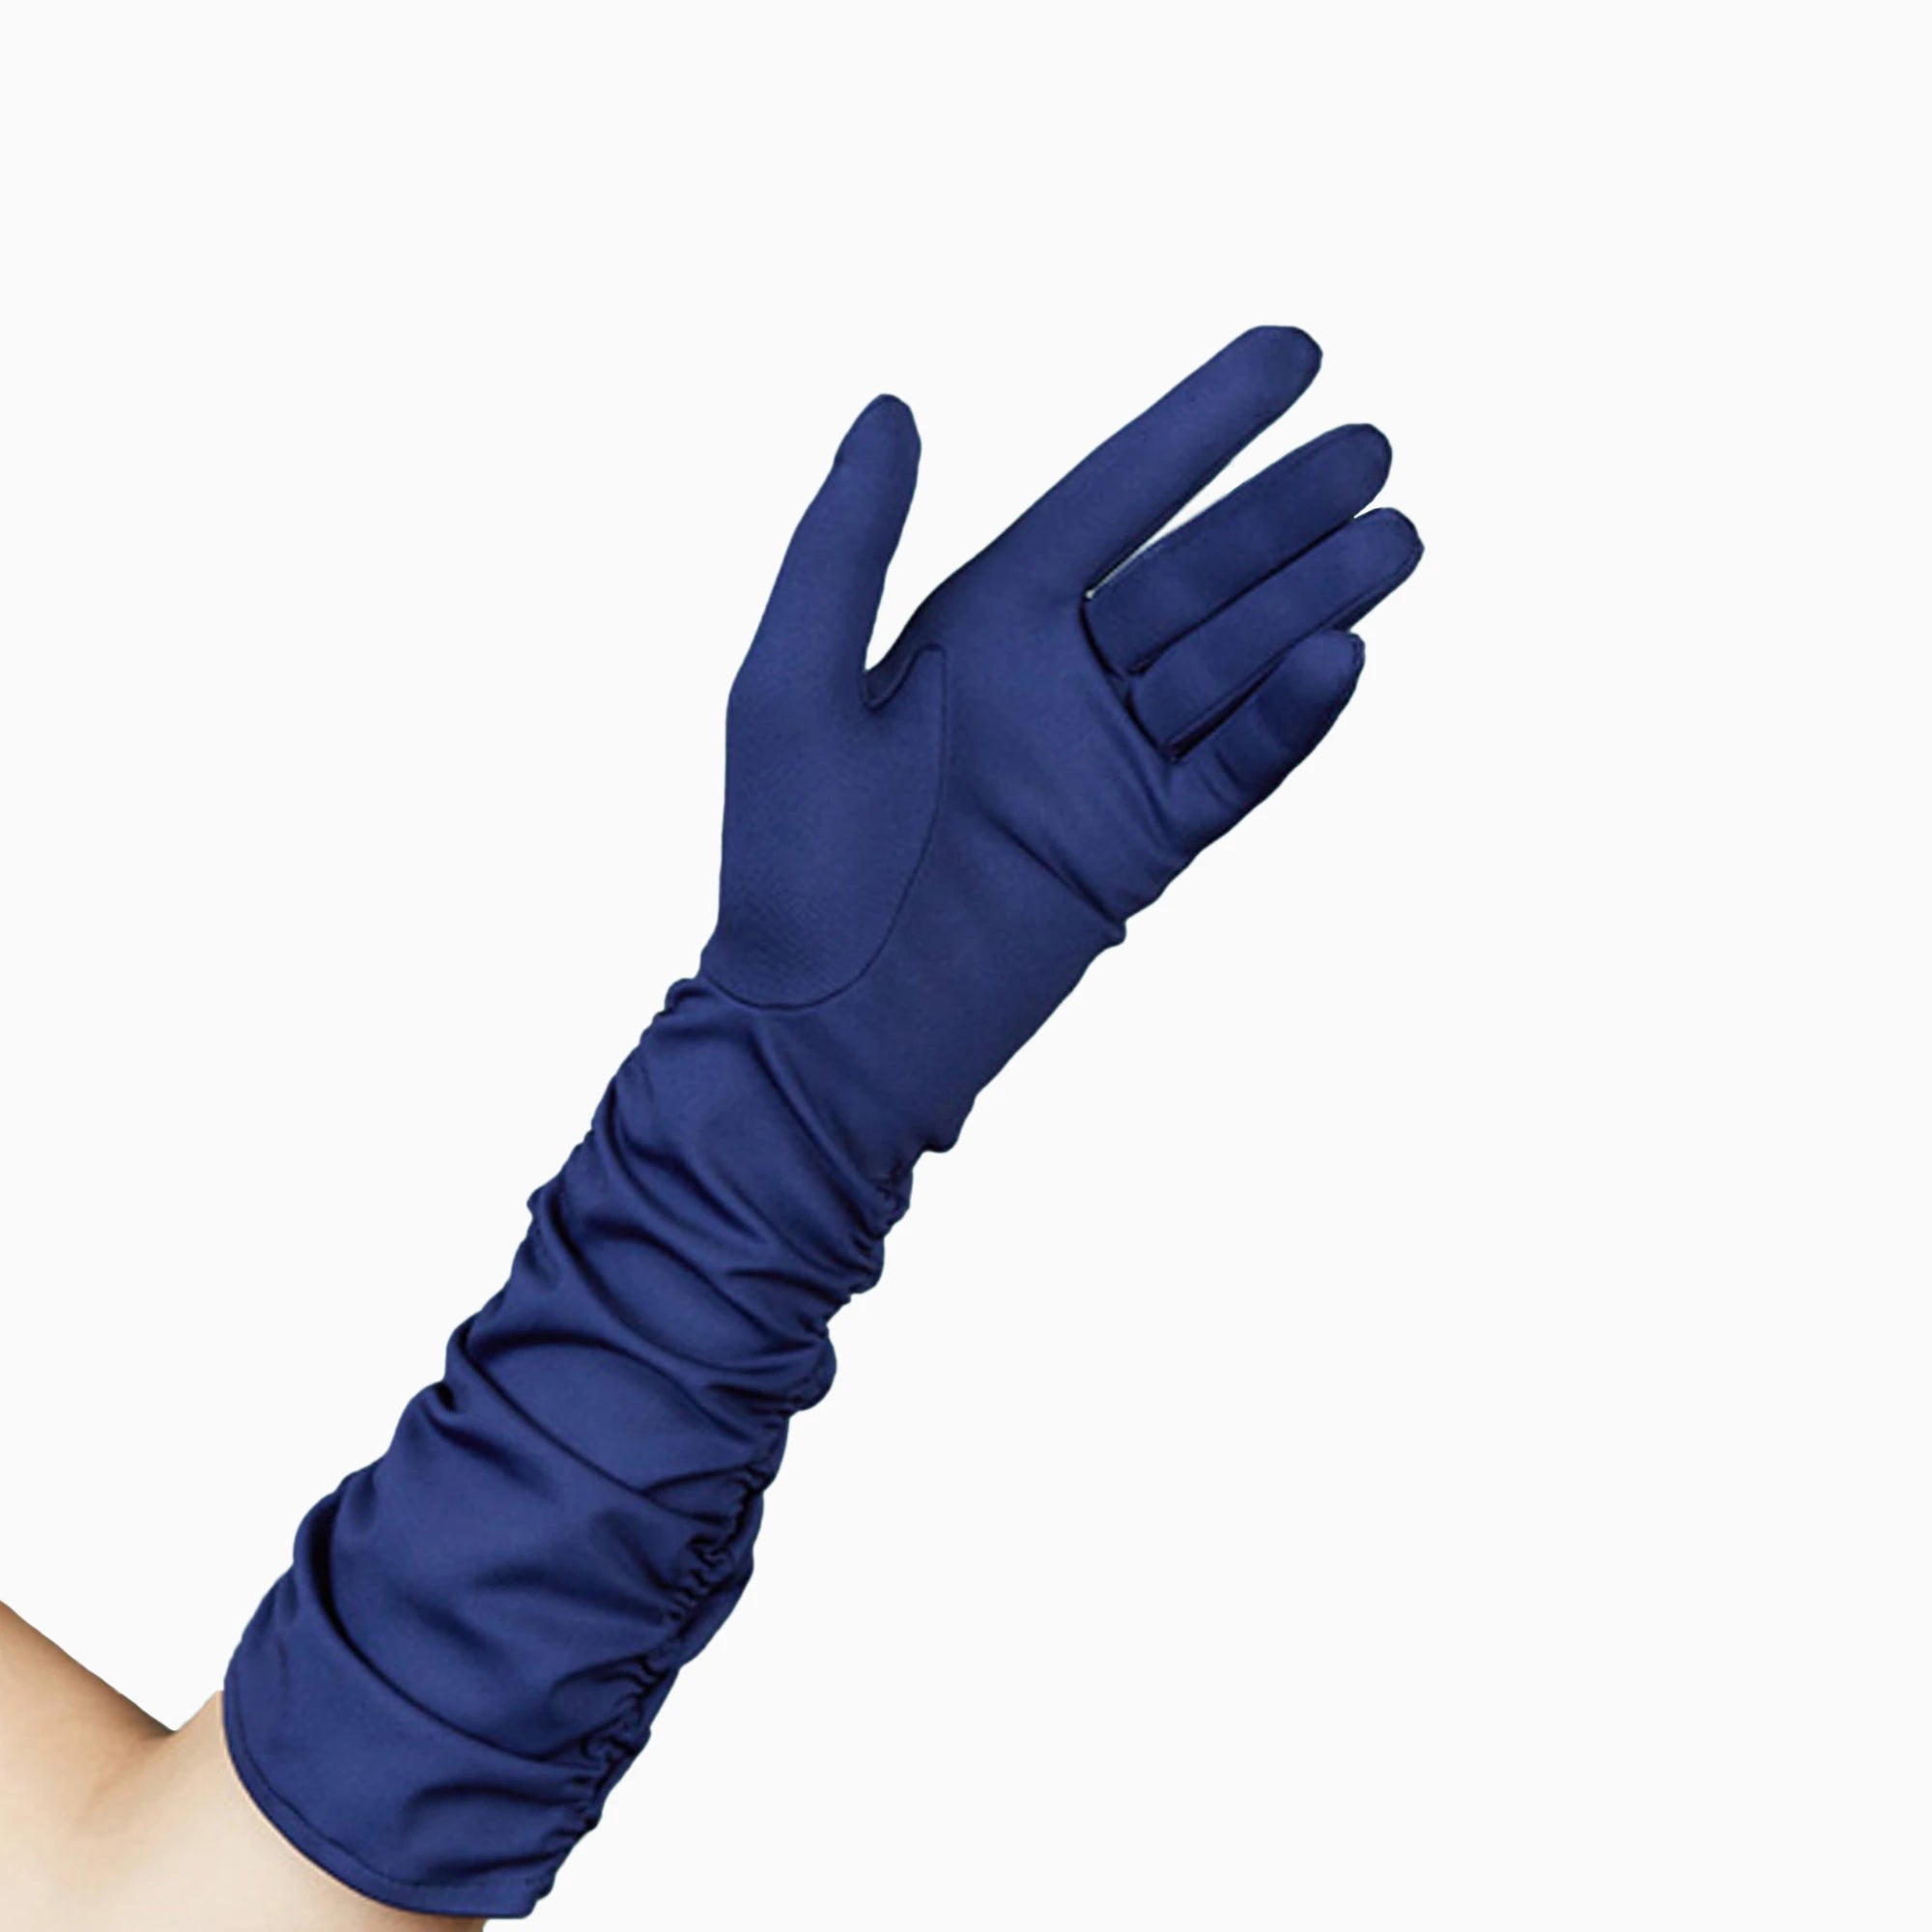 A woman&#39;s hand showing the Stefanie elbow length, dark blue gloves with palm open.